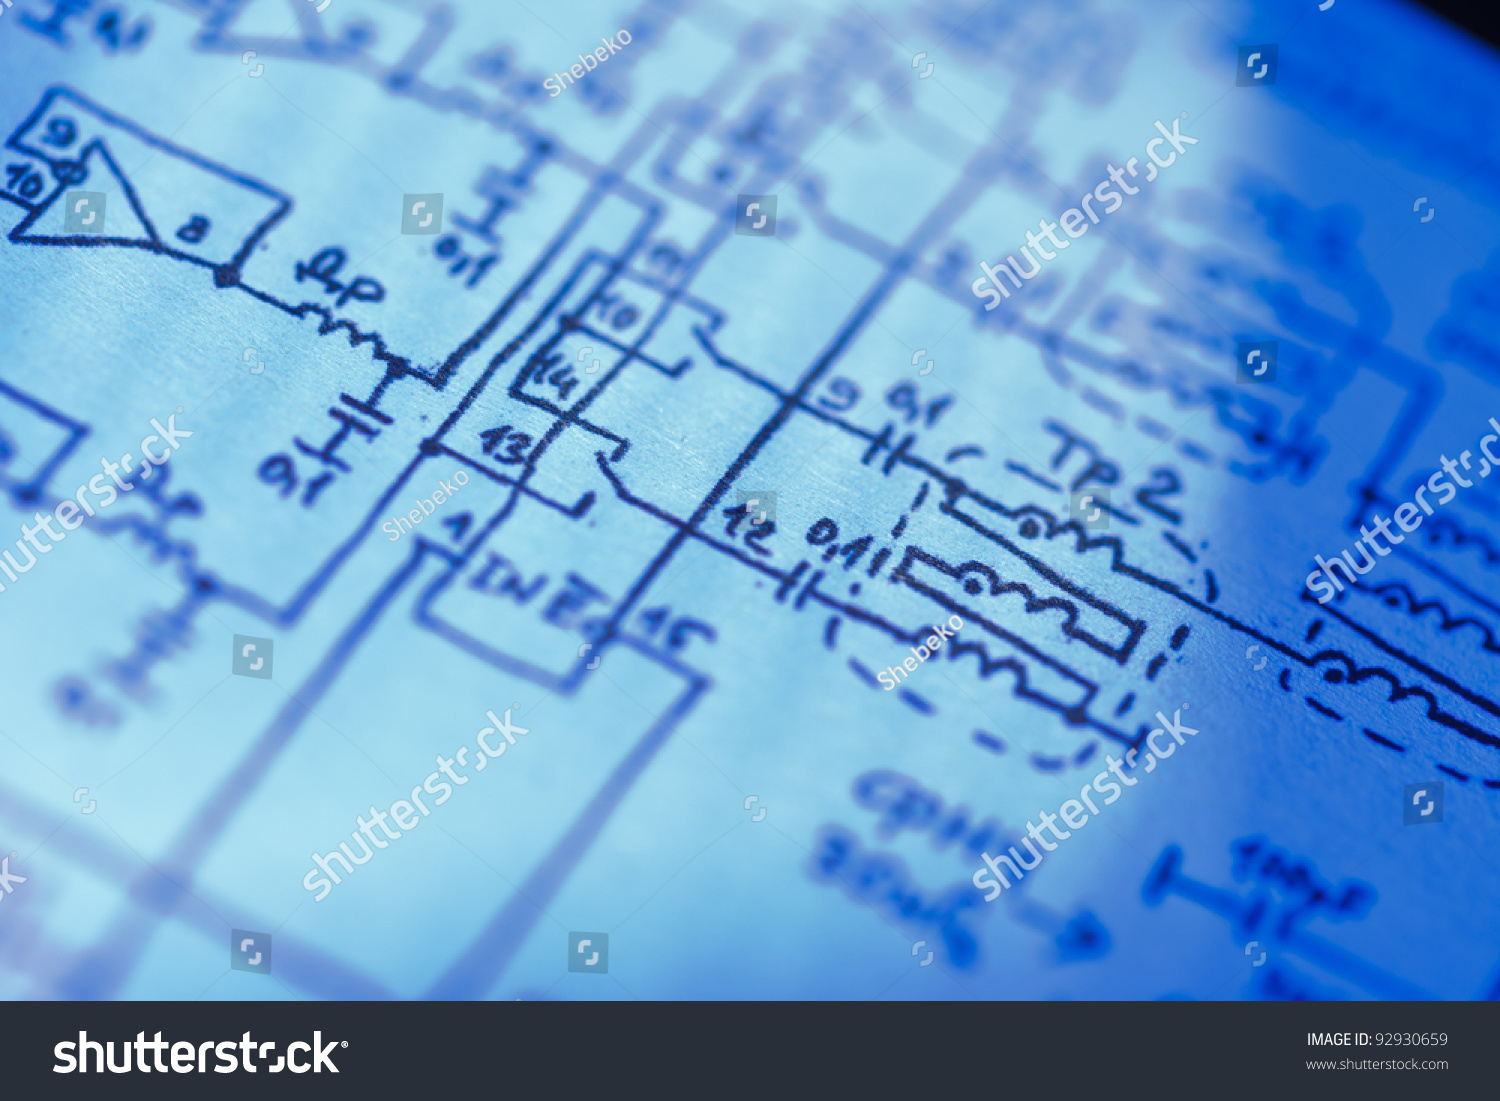 powerpoint-template-electrical-engineer-electronics-schematic-ujukhnmu